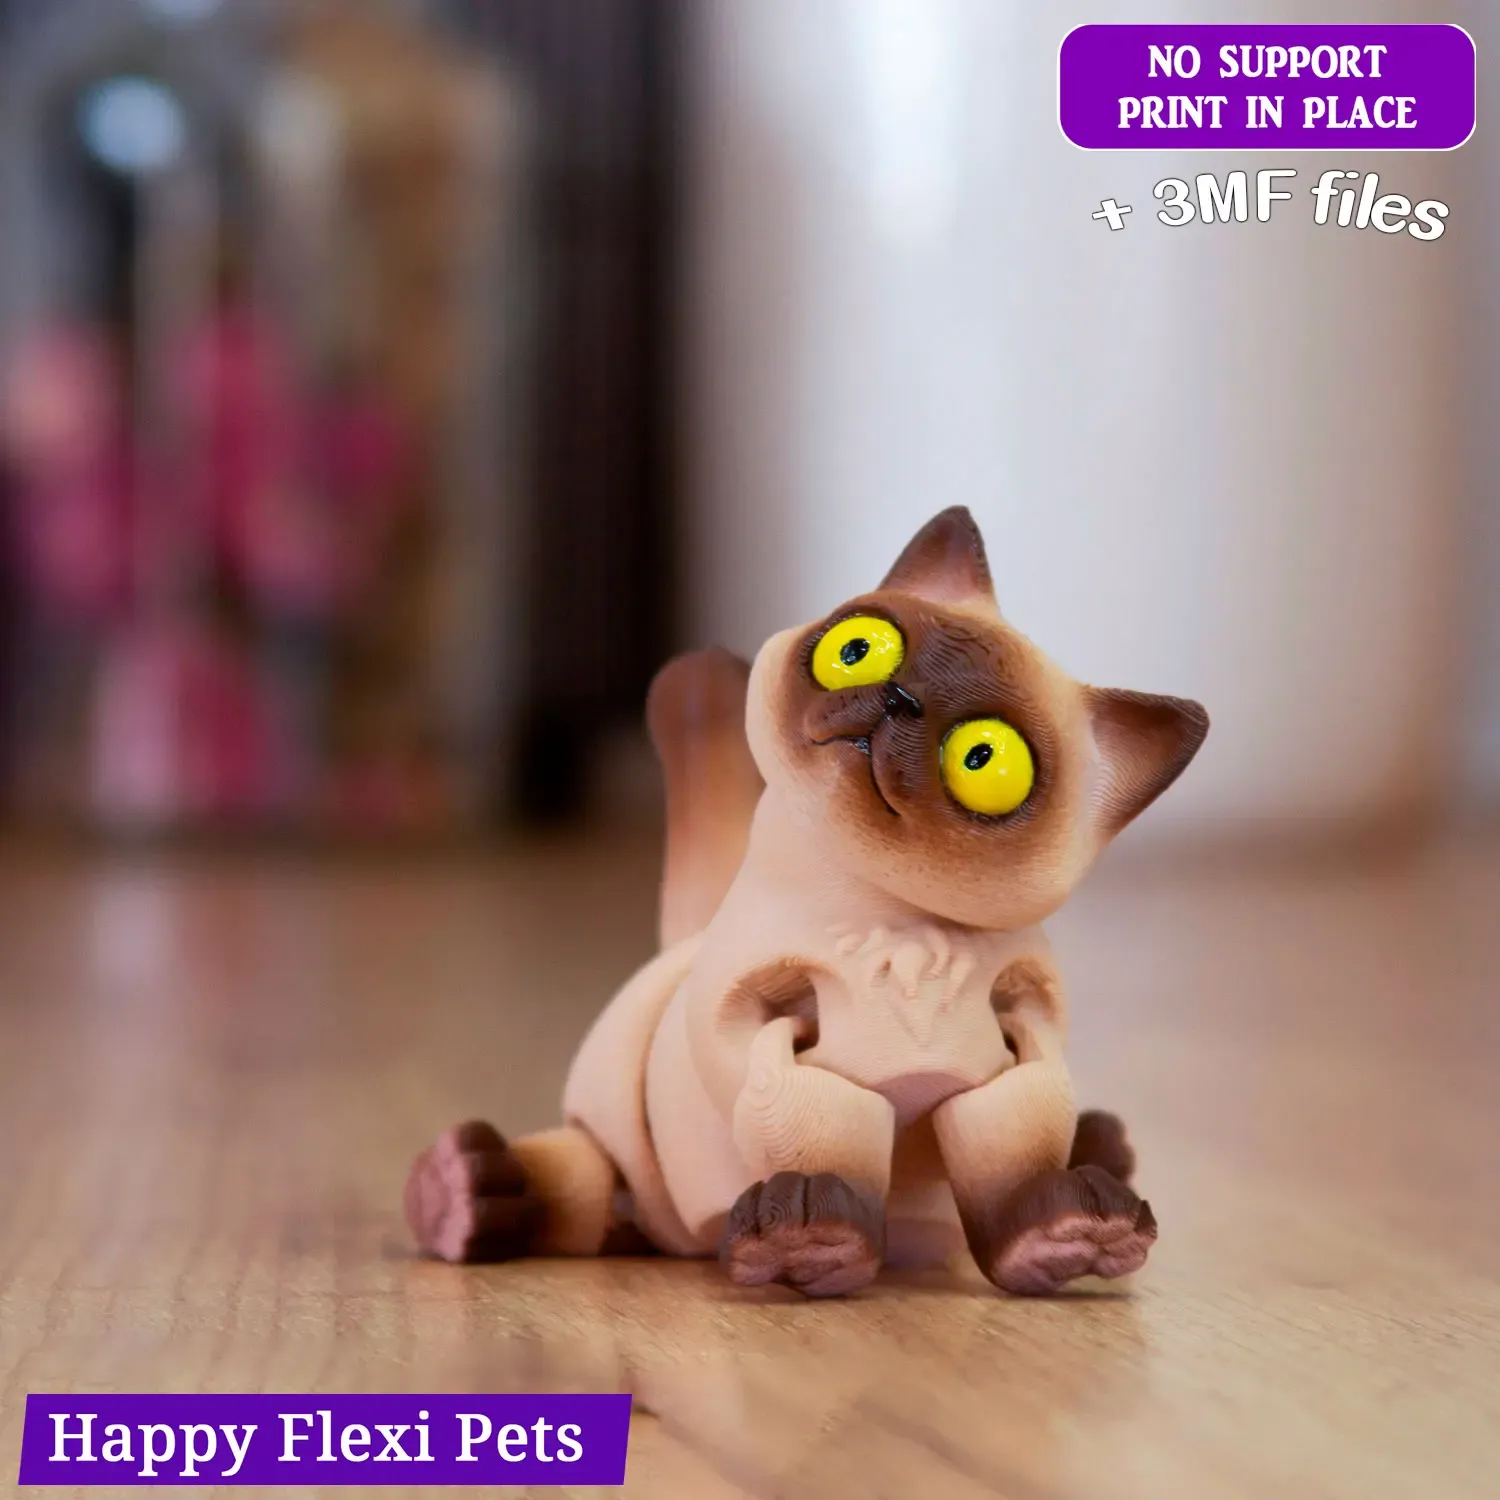 Baron the articulated fat cat toy - Happy Flexi pets